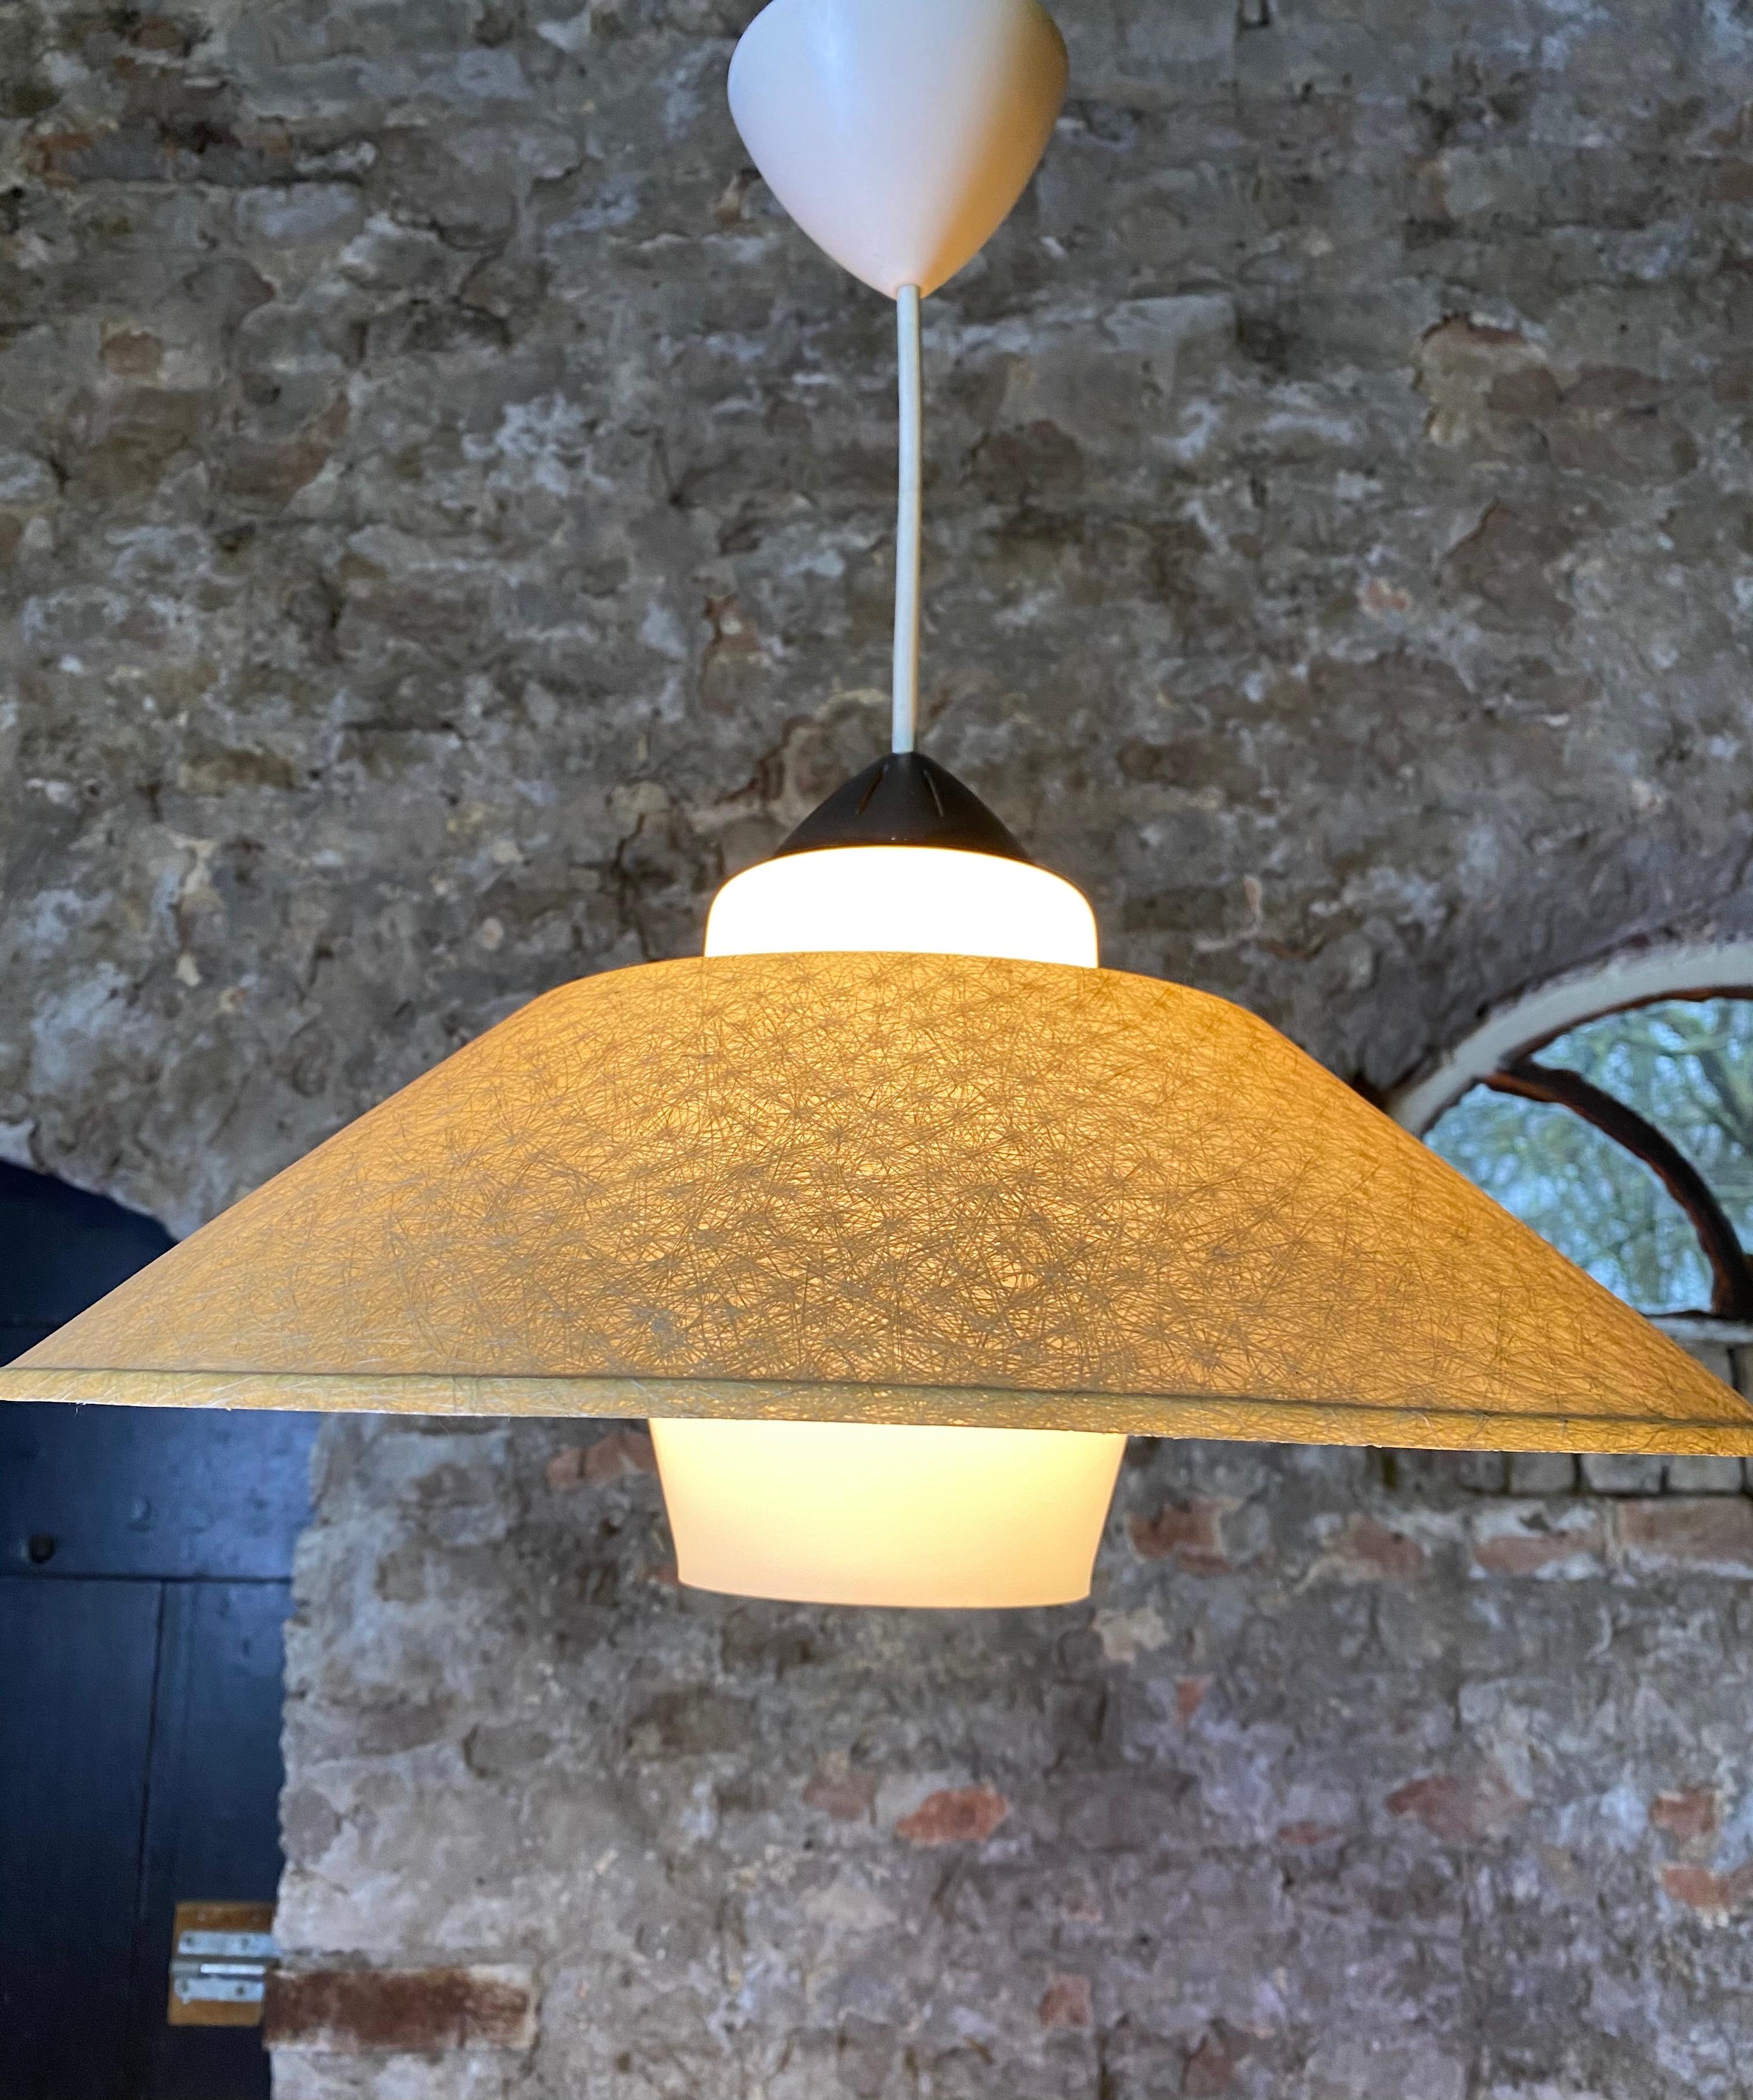 Rare fiberglass /opaline glass ceiling lamp by Louis Kalff for Philips, 1950s.
The fiberglass hood rest on the opaline glass base. Very nice warm light because of the fiber. A typical great Dutch design from the 50s. Minimalistic and very light but